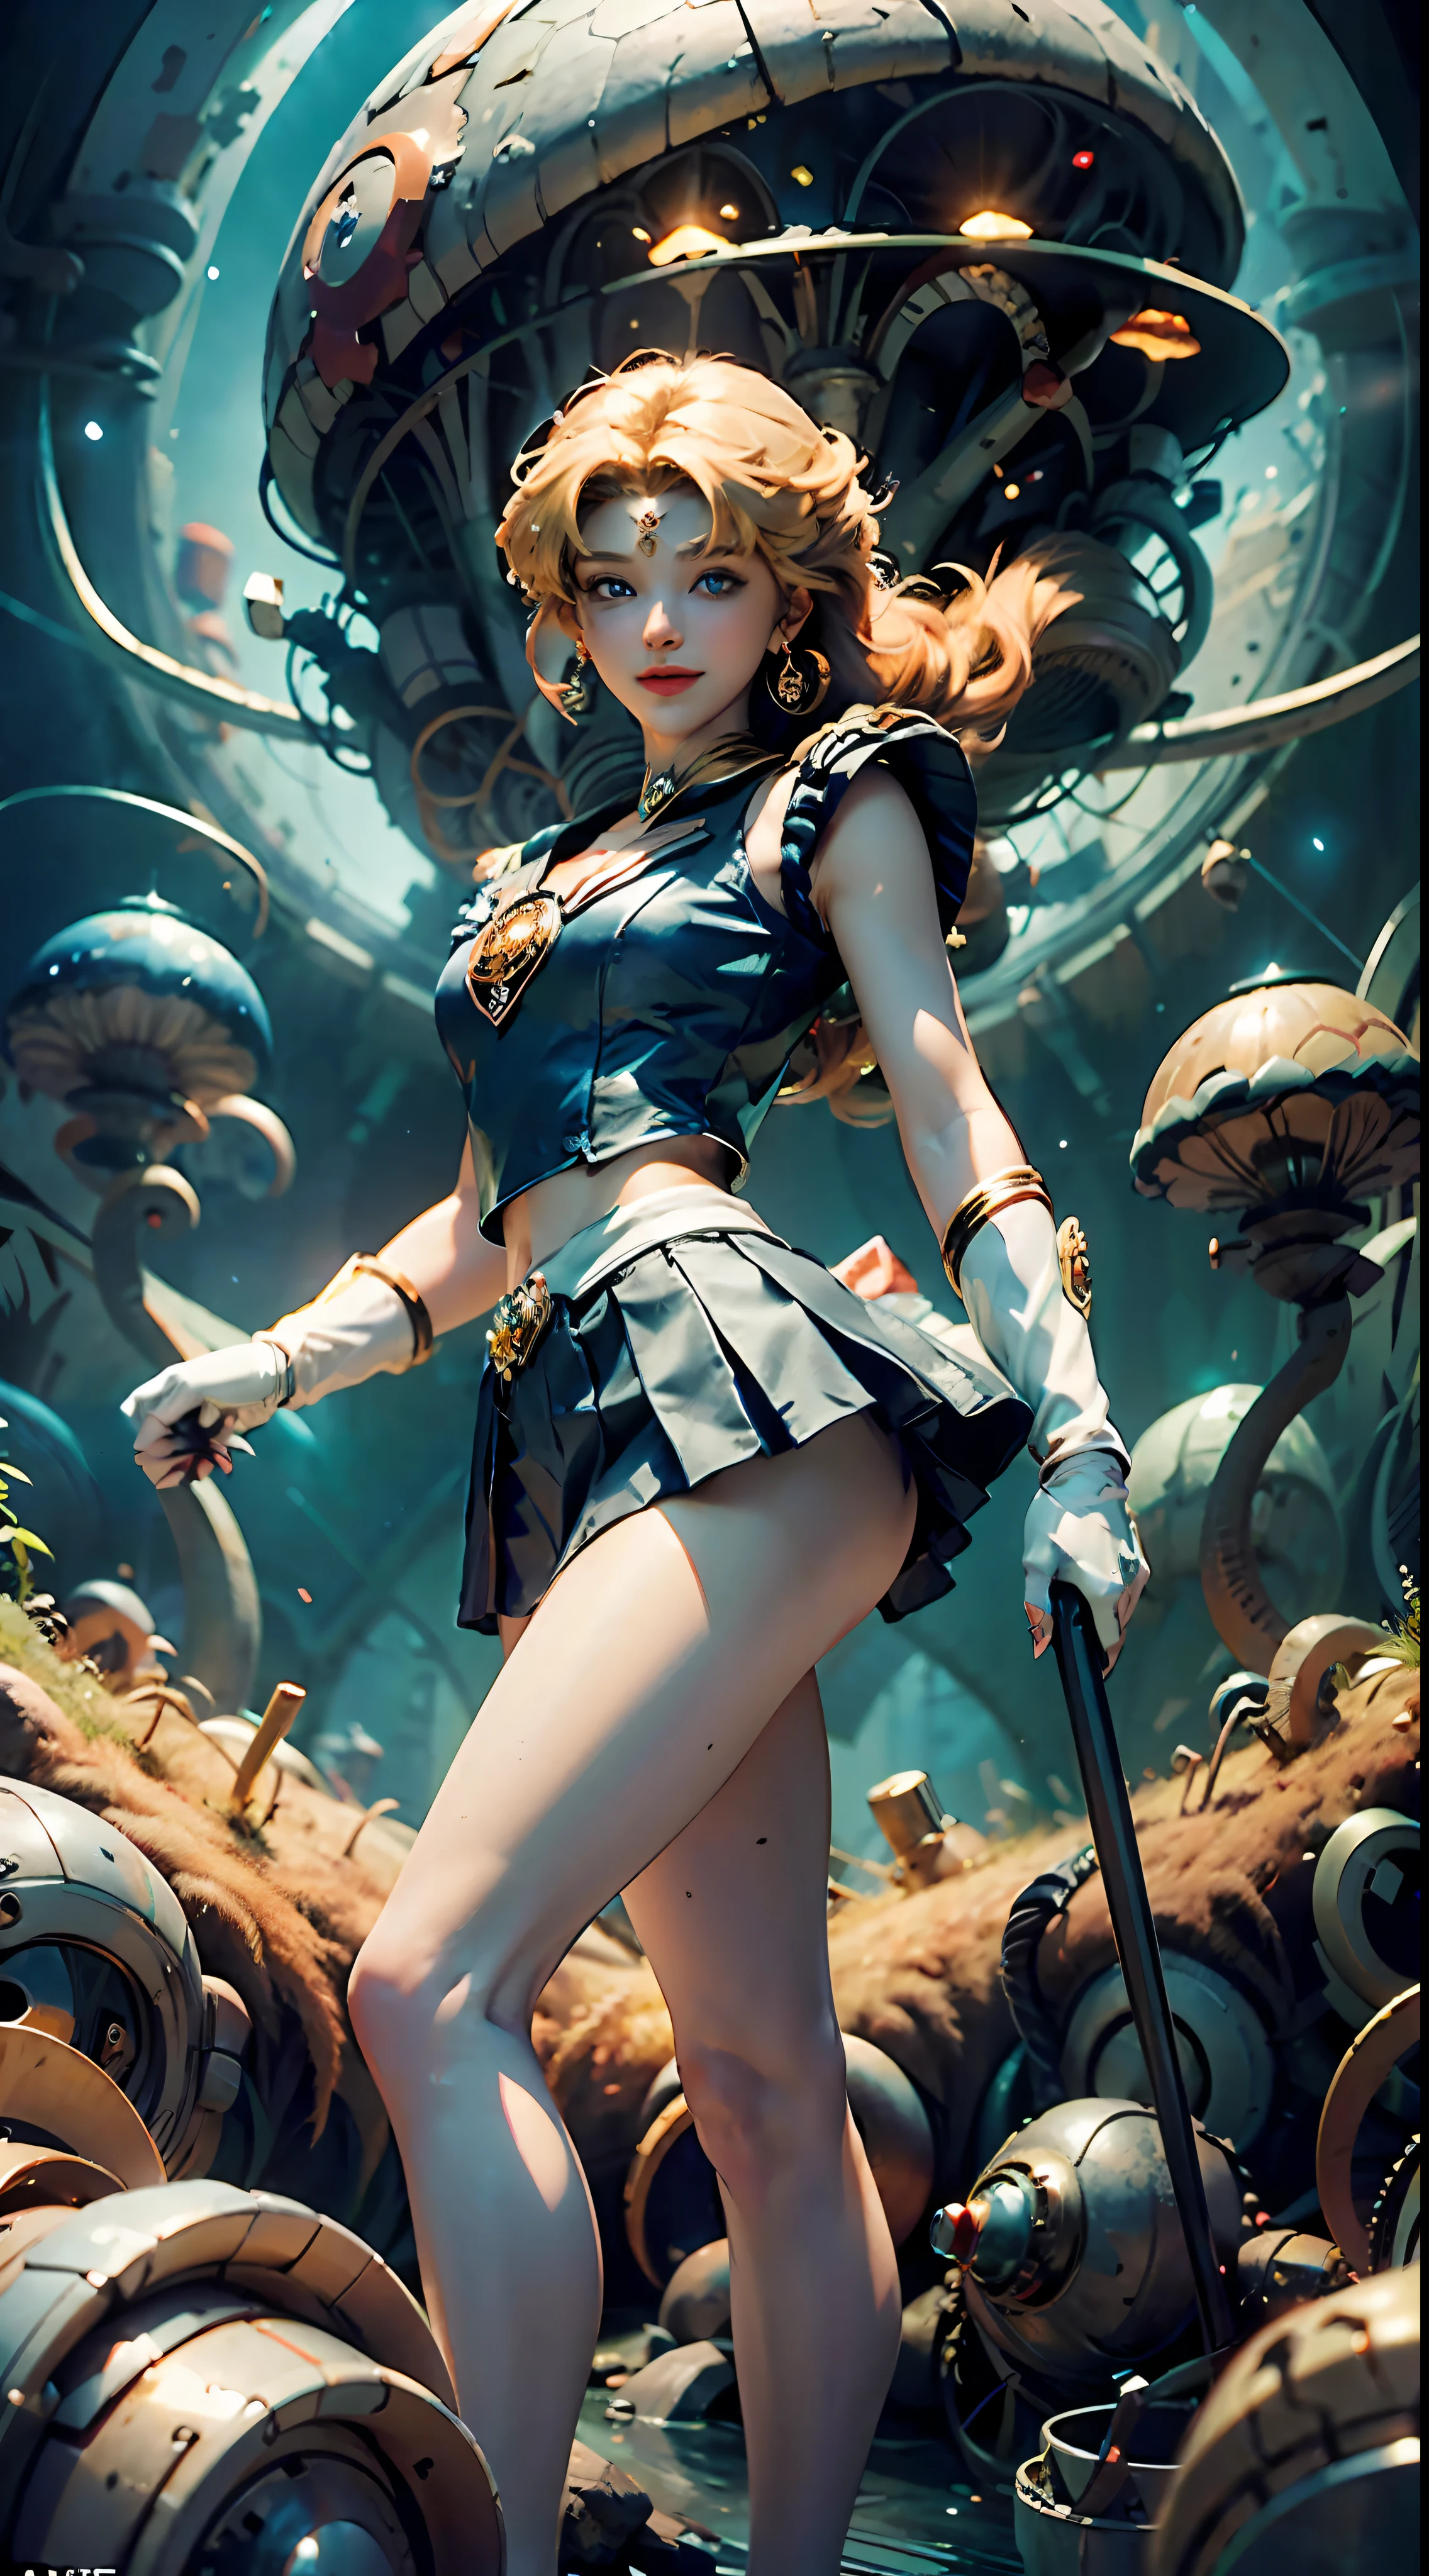 (Extreme detail CG Unity 8K wallpaper, masterpiece, highest quality), (exquisite lighting and shadow, highly dramatic picture, cinematic lens effect), (Sailor Moon: 1.1), charming smile, double tail, blue eyes, blond hair, tight top, white gloves, mini skirt, dynamic pose), the background is the universe (excellent detail, excellent lighting, wide angle), (excellent rendering, enough to stand out in its class),